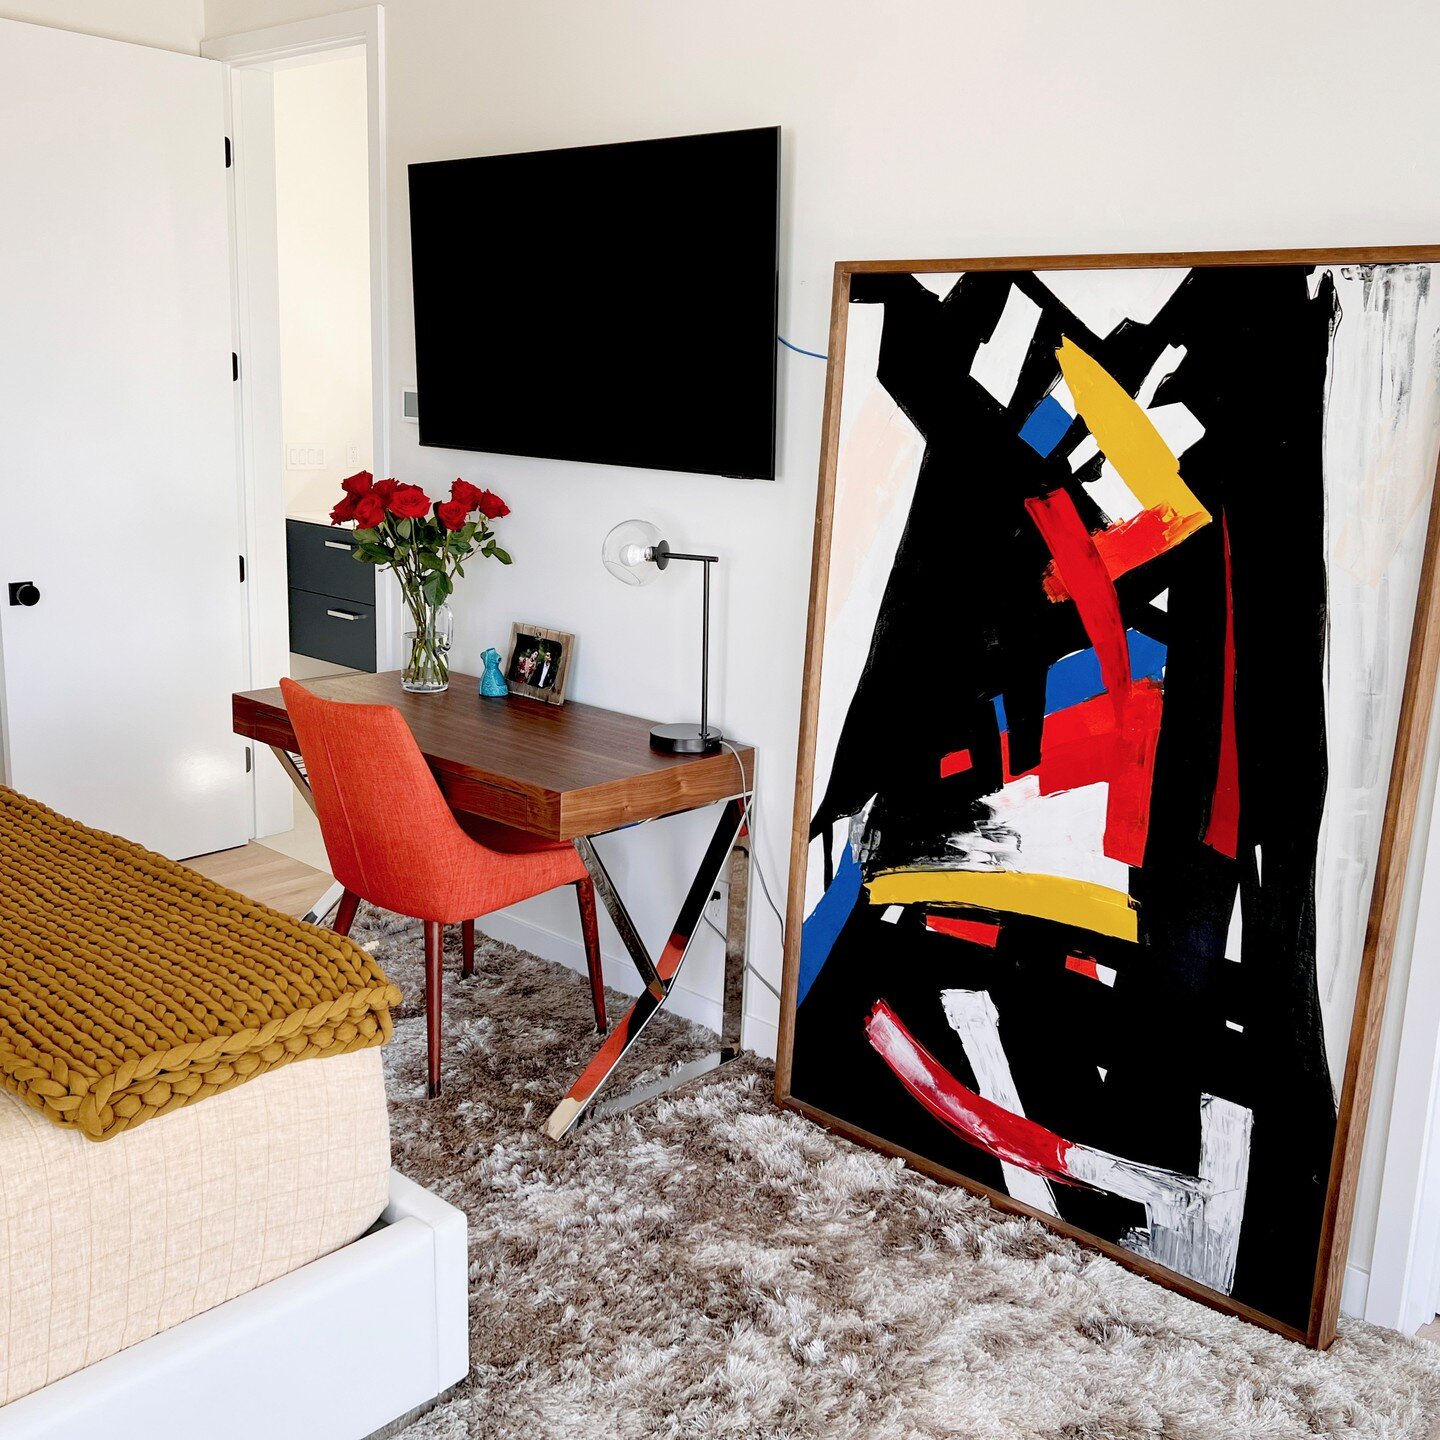 Stimulating and uplifting modern art in the bedroom.

Design by SYLVIA BEEZ for M.A.P. INTERIORS

#interiordesign #interiorinspo #modernart #boldandcolorful #bedroomdesign #workspace #homedecorideas